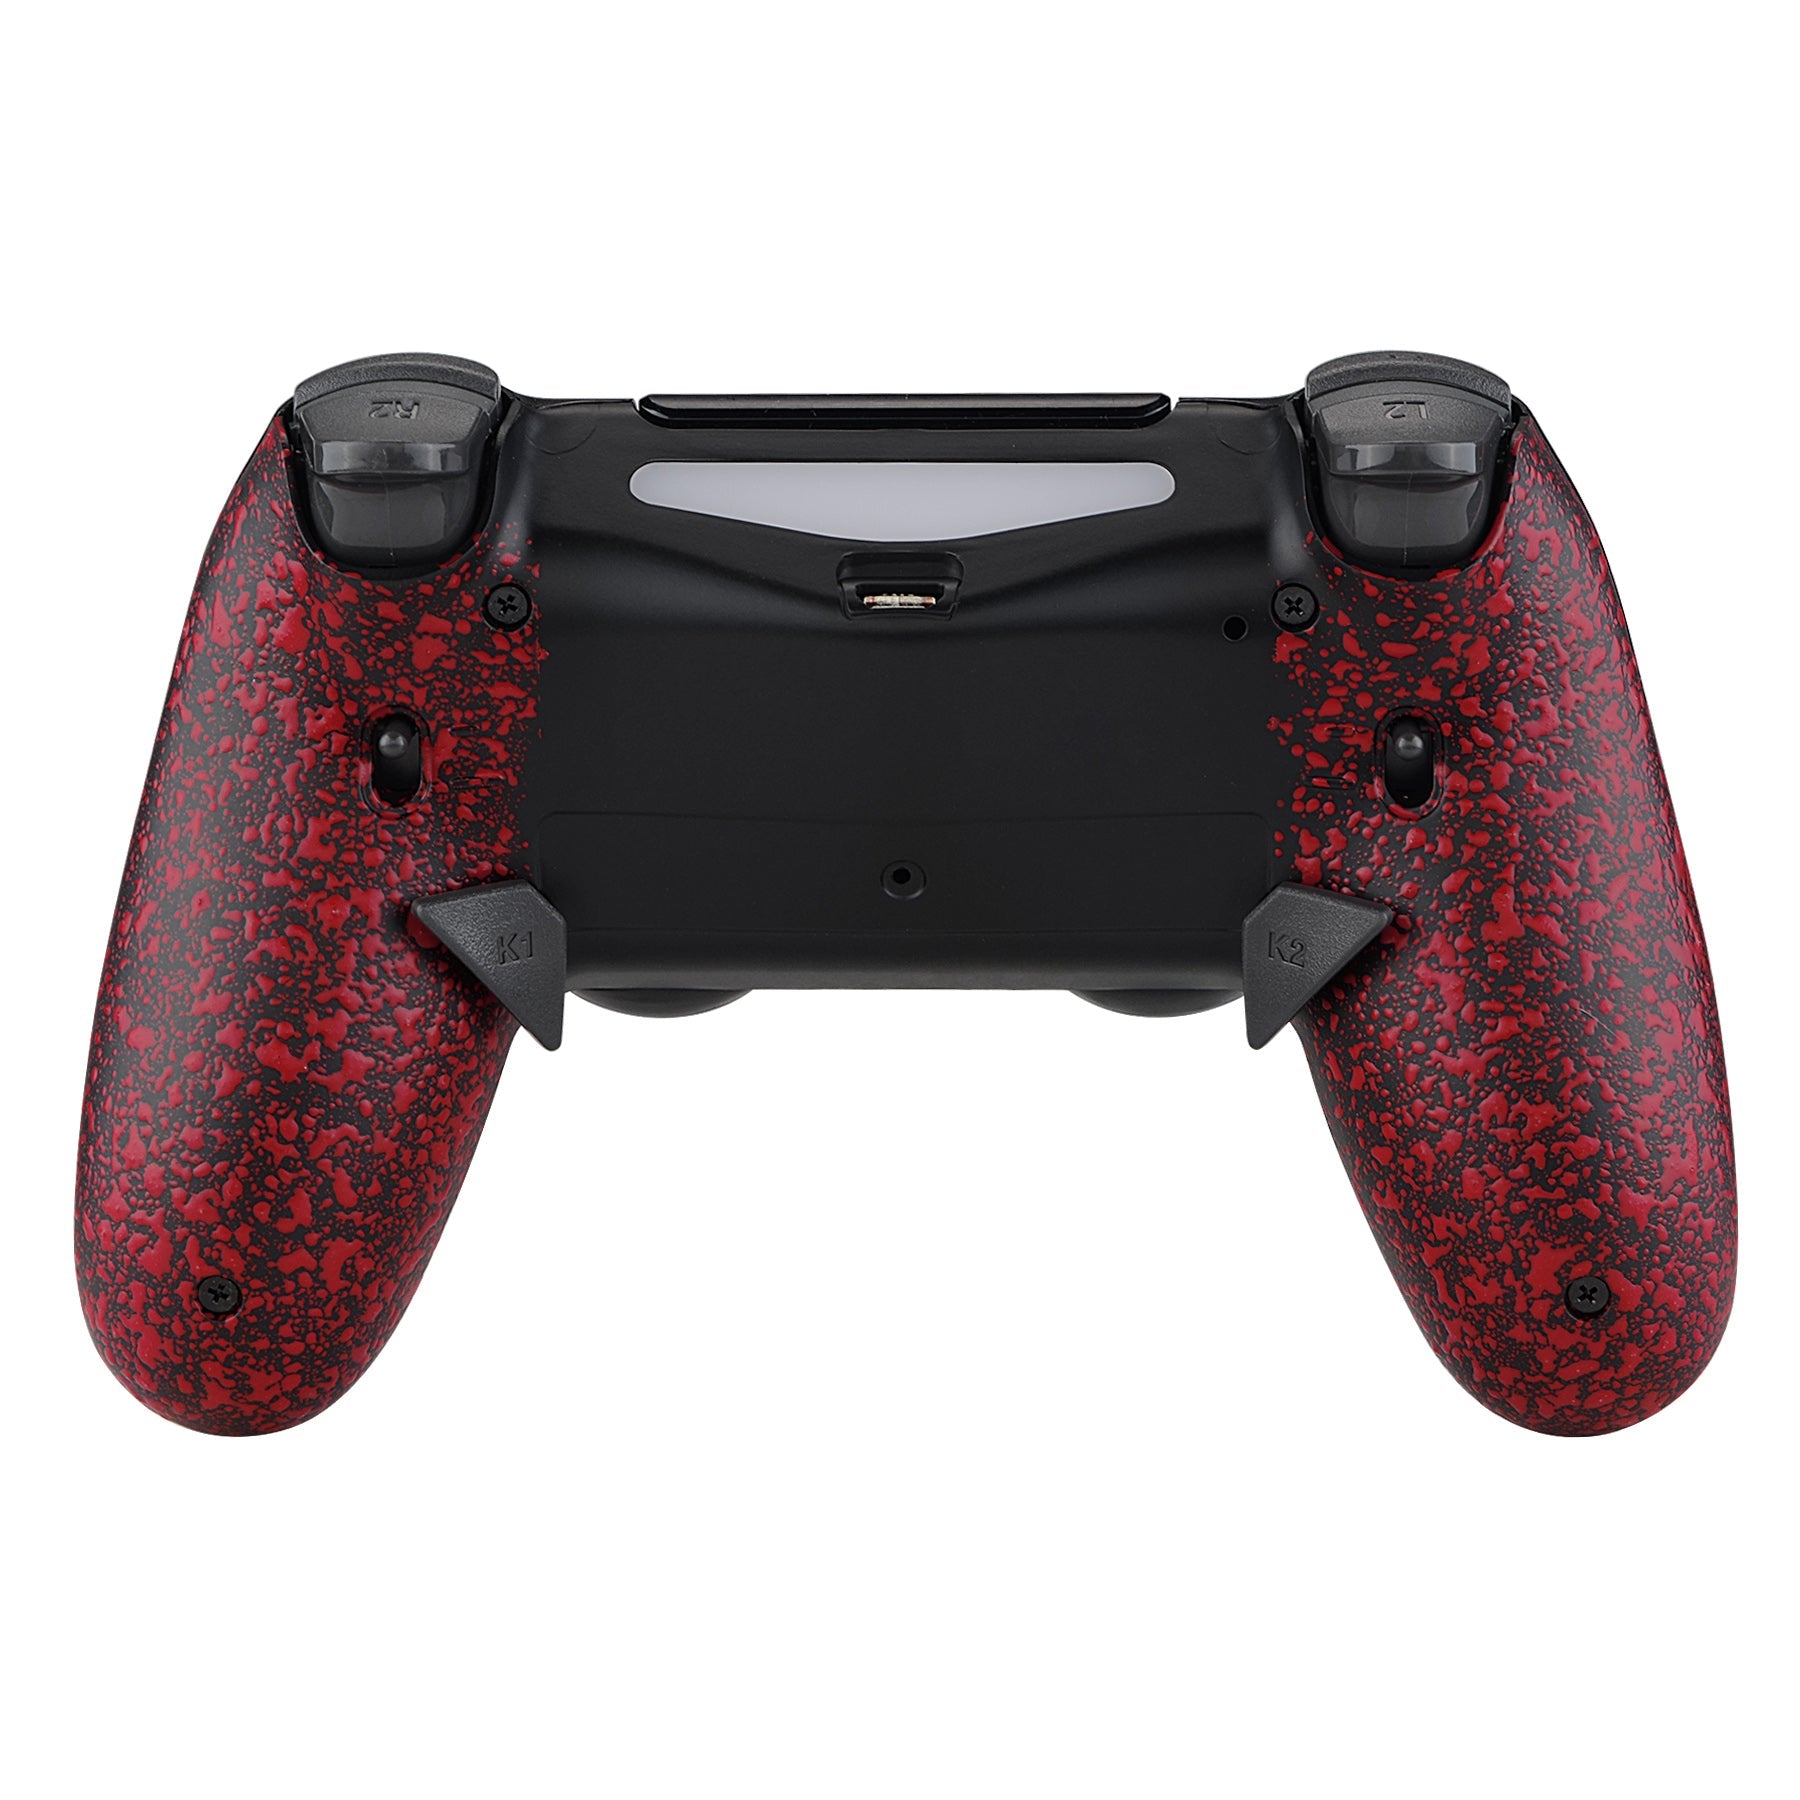 eXtremeRate Retail Textured Red Dawn 2.0 FlashShot Trigger Stop Remap Kit for ps4 CUH-ZCT2 Controller, Part & Back Shell & 2 Back Buttons & 2 Trigger Lock for ps4 Controller JDM 040/050/055 - P4QS003